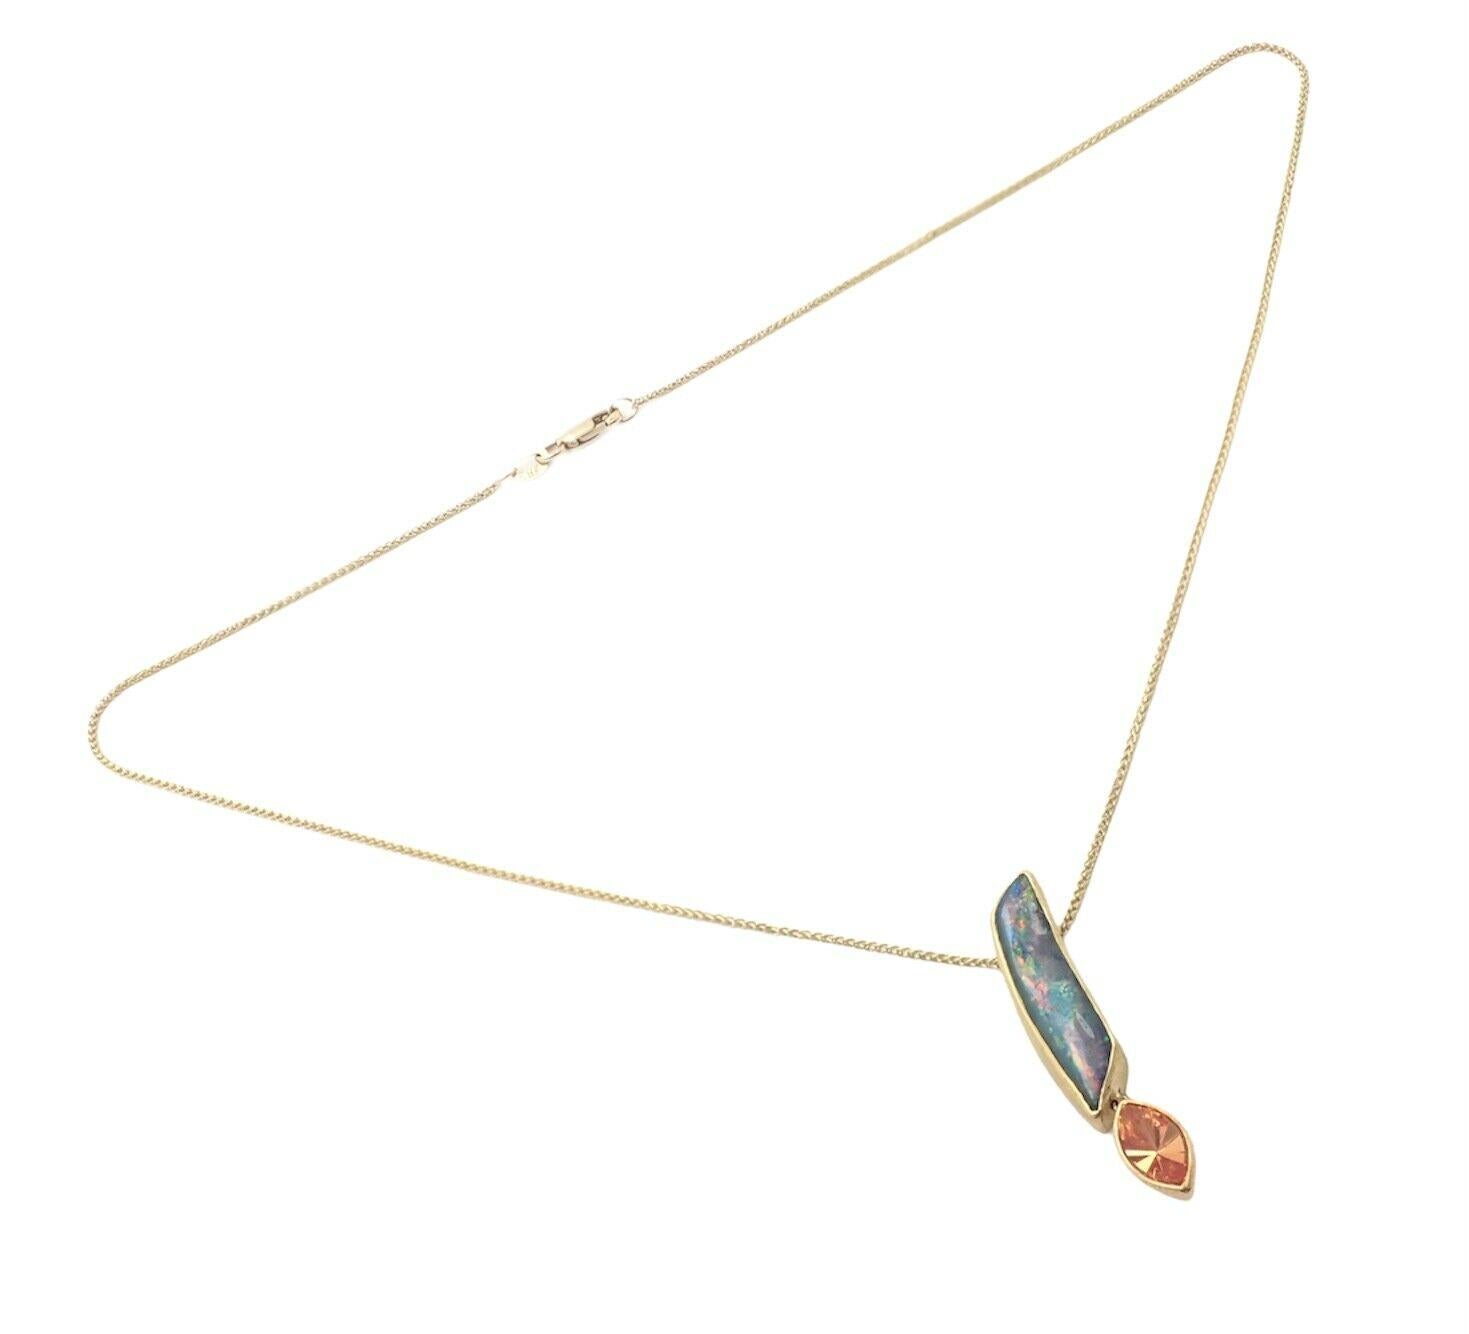 18k Yellow Gold Black Opal Orange Spessartite Necklace By Michael Zobel.
With 1 Black Opal: 5.5mm x 23mm and 1 Orange Spessartite Garnet - 9.5mm x 5mm x 3mm Estimated Weight 0.89ct

 Details:
 Length: 15.75